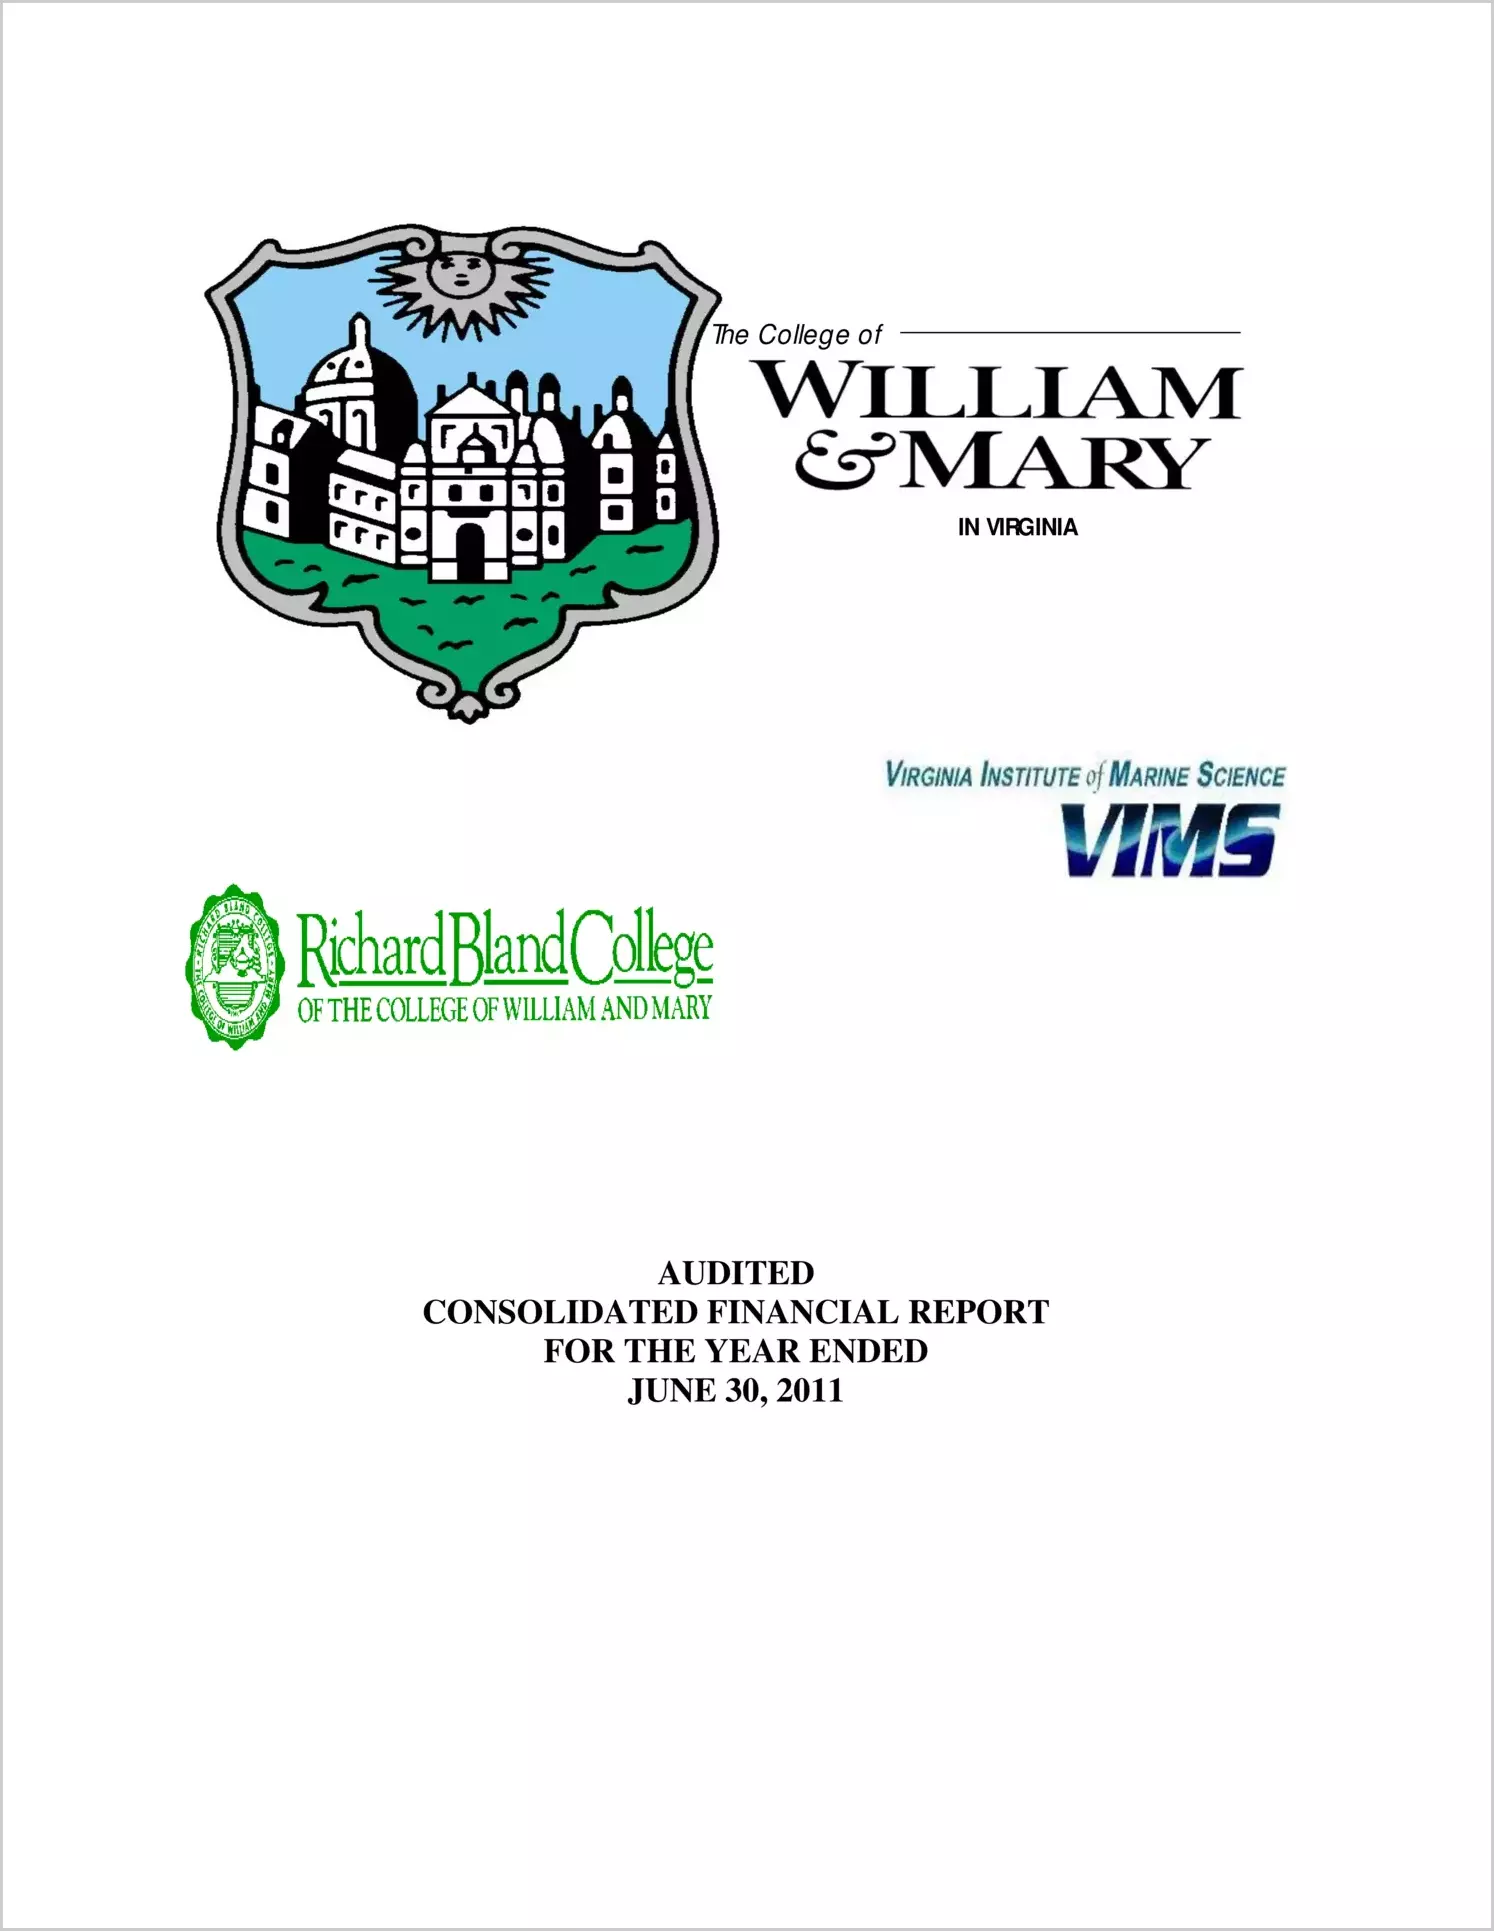 William & Mary, Virginia Institute of Marine Science, and Richard Bland College Financial Statements for the year ended June 30, 2011